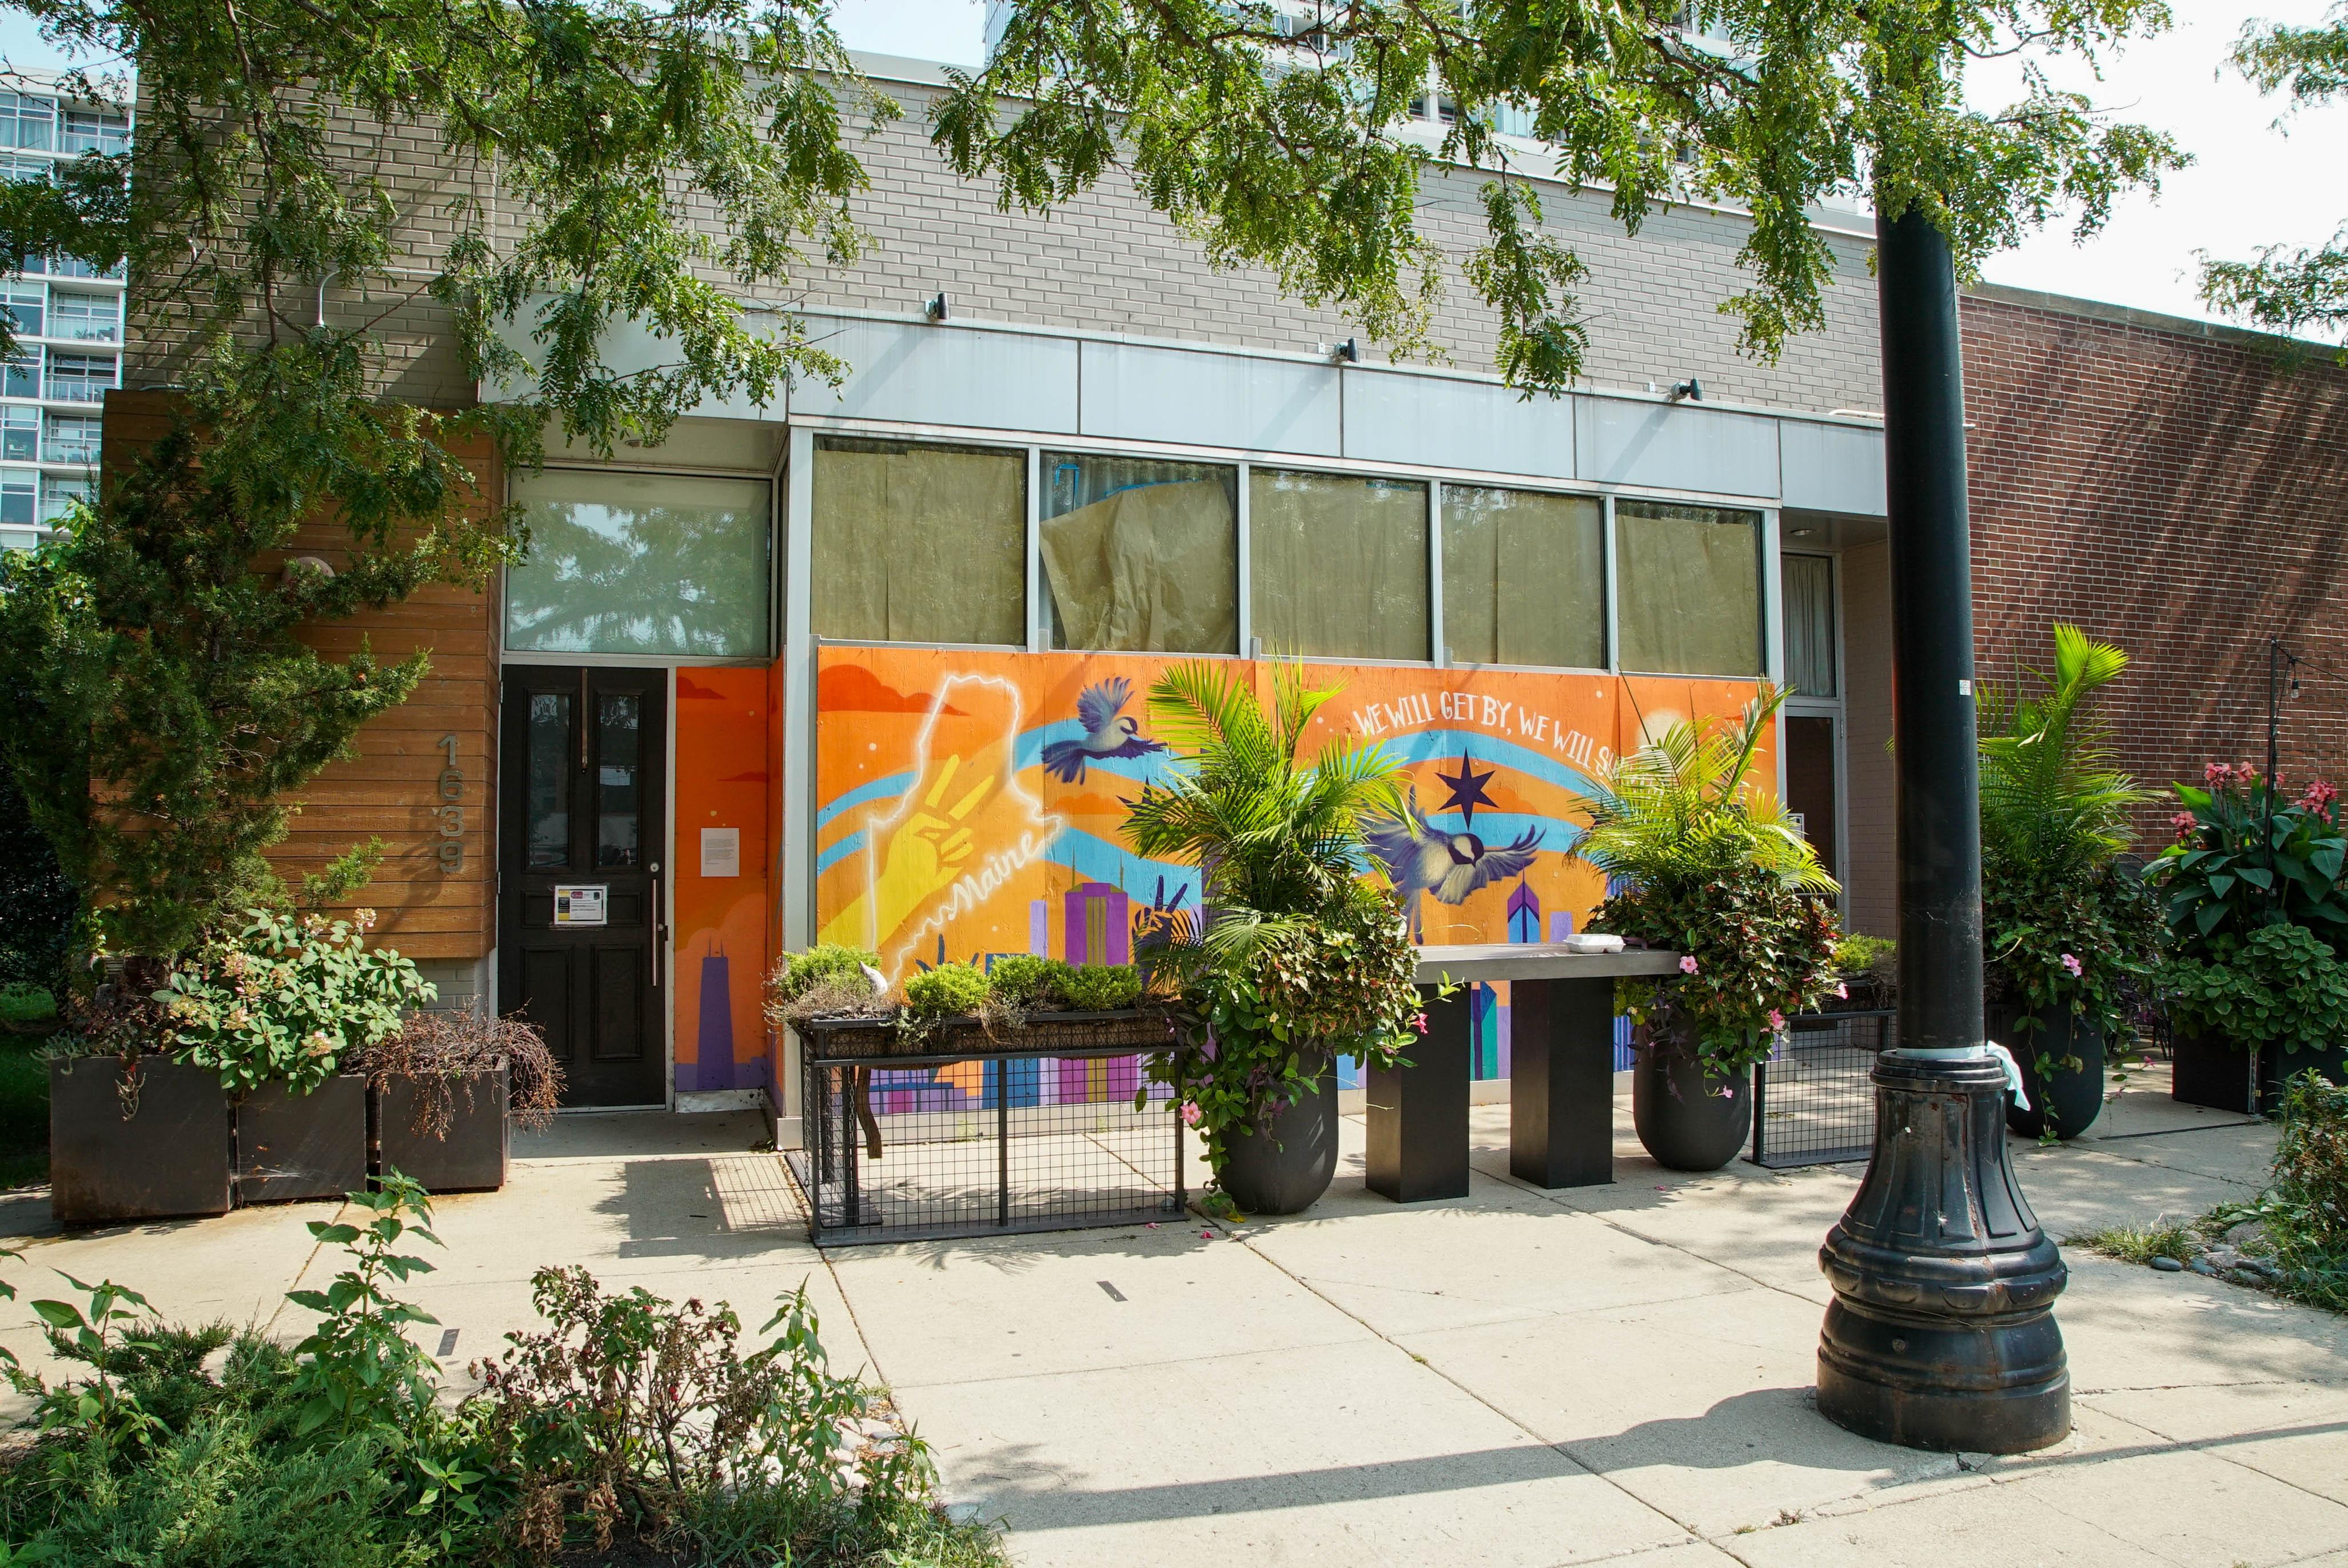 The exterior of a colorful restaurant taken from across the street.